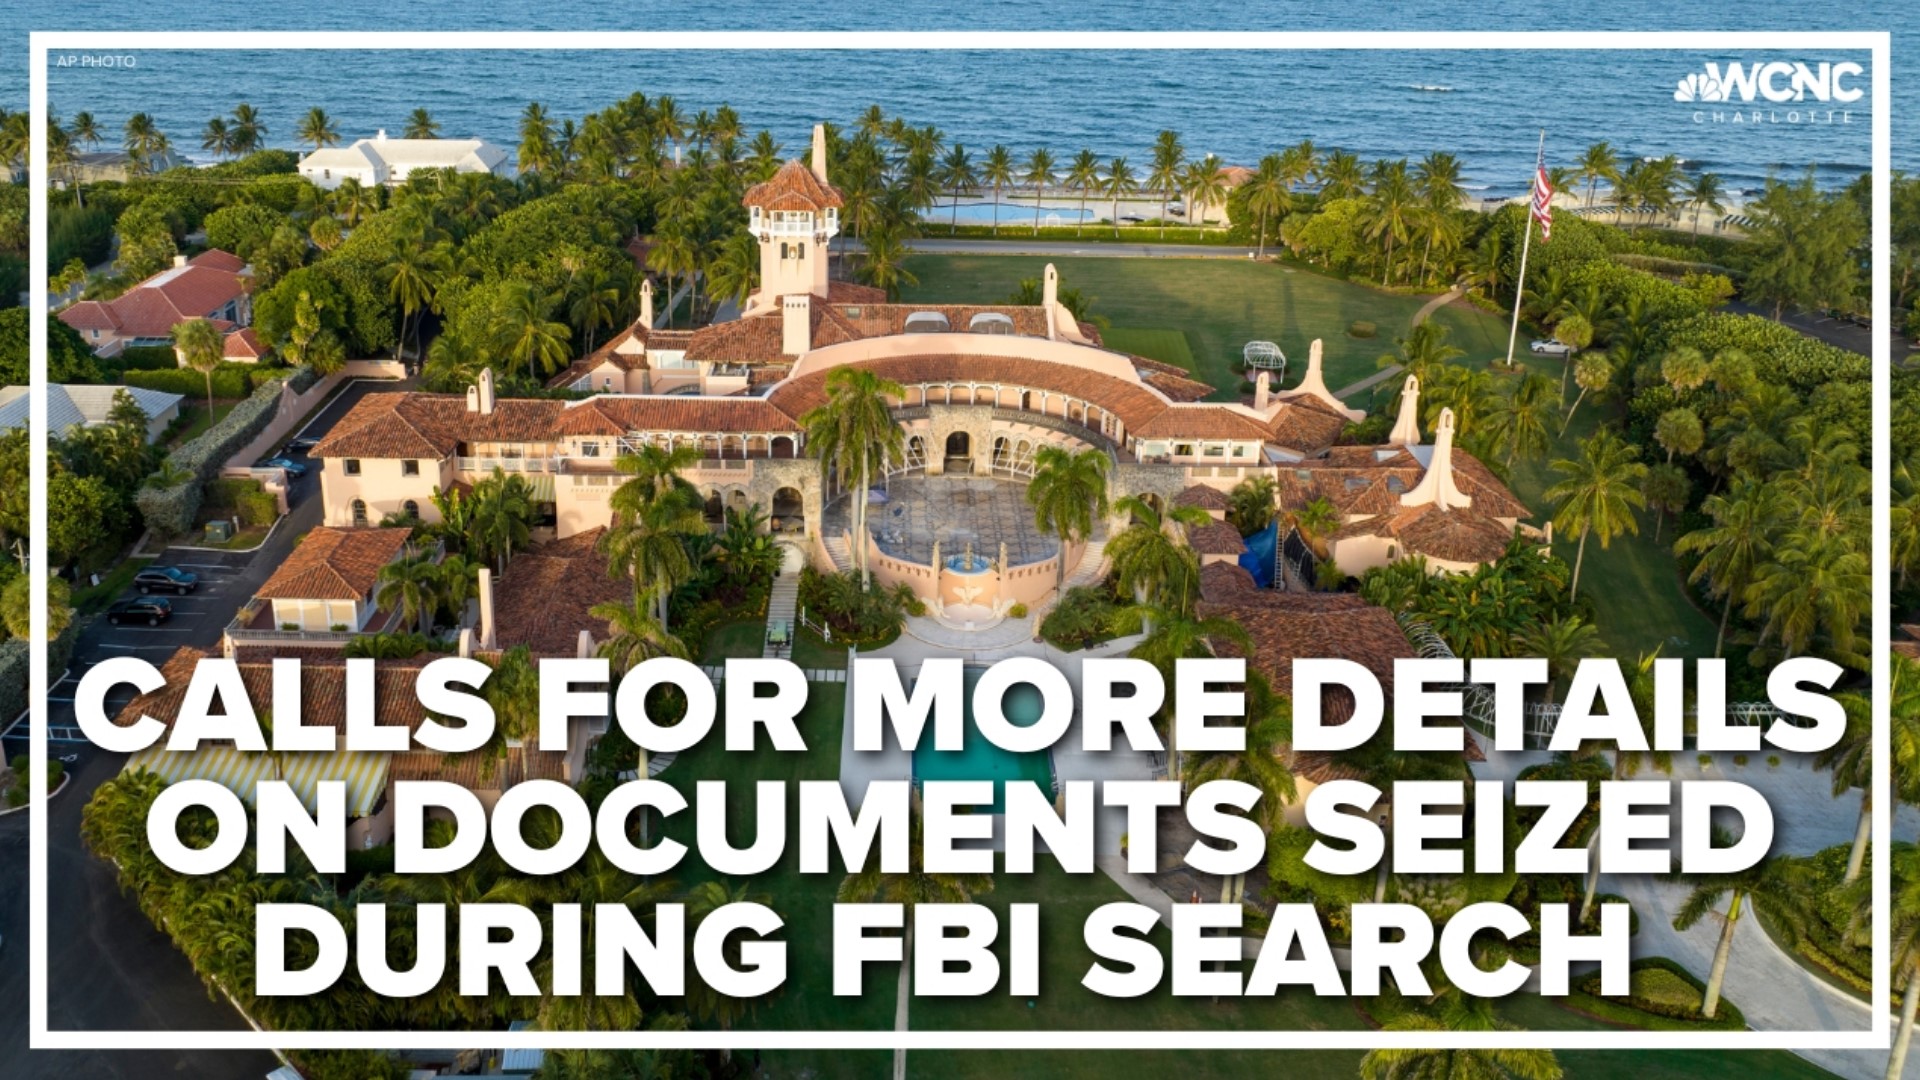 The Justice Department on Monday rebuffed efforts to make public the affidavit supporting the search warrant for former President Donald Trump’s estate in Florida.